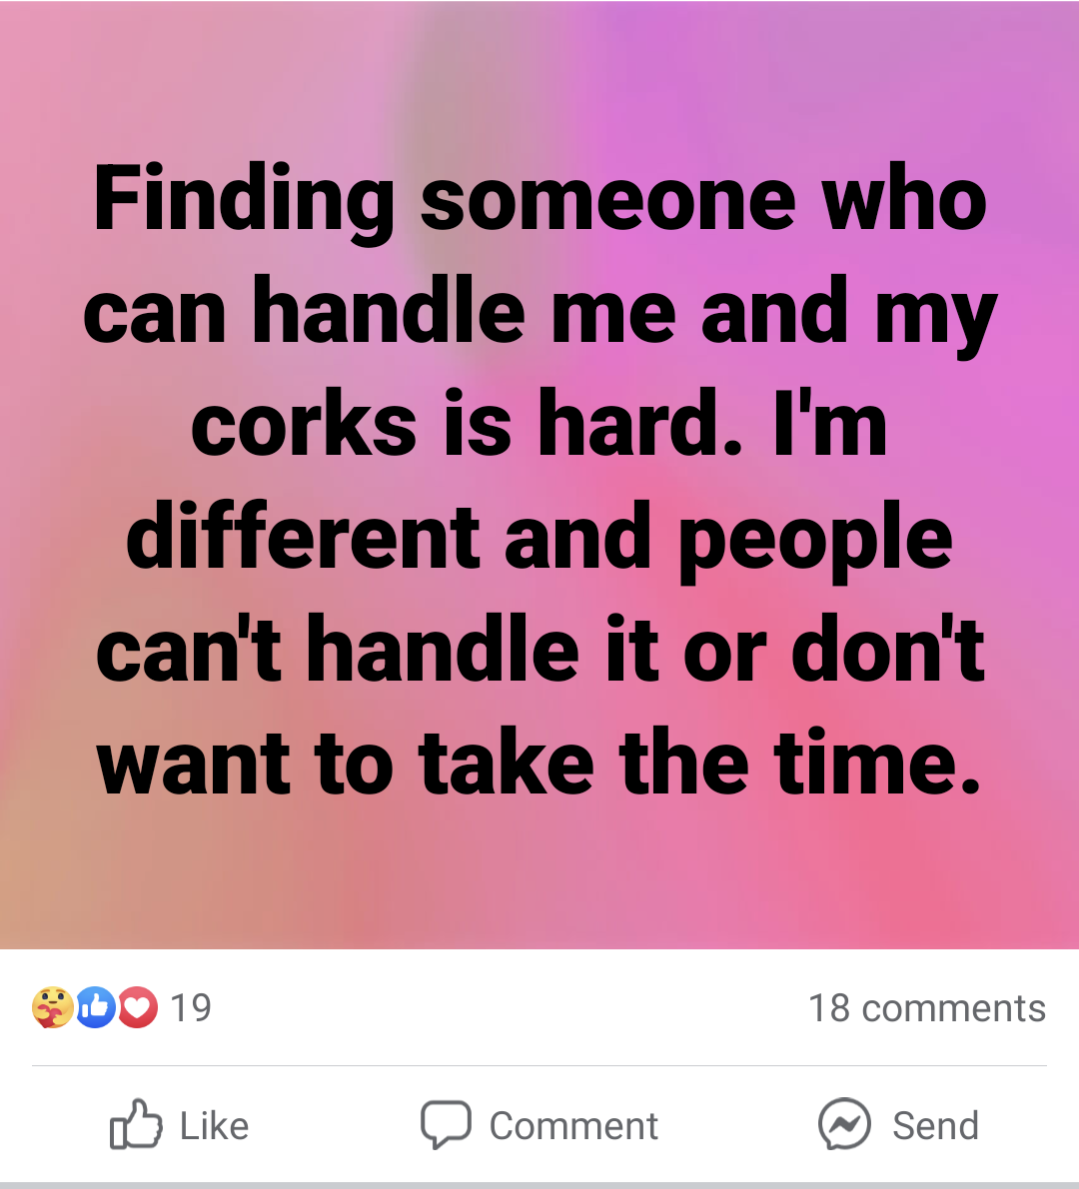 &quot;Finding someone who can handle me and my corks is hard; I&#x27;m different and people can&#x27;t handle it or don&#x27;t want to take the time&quot;